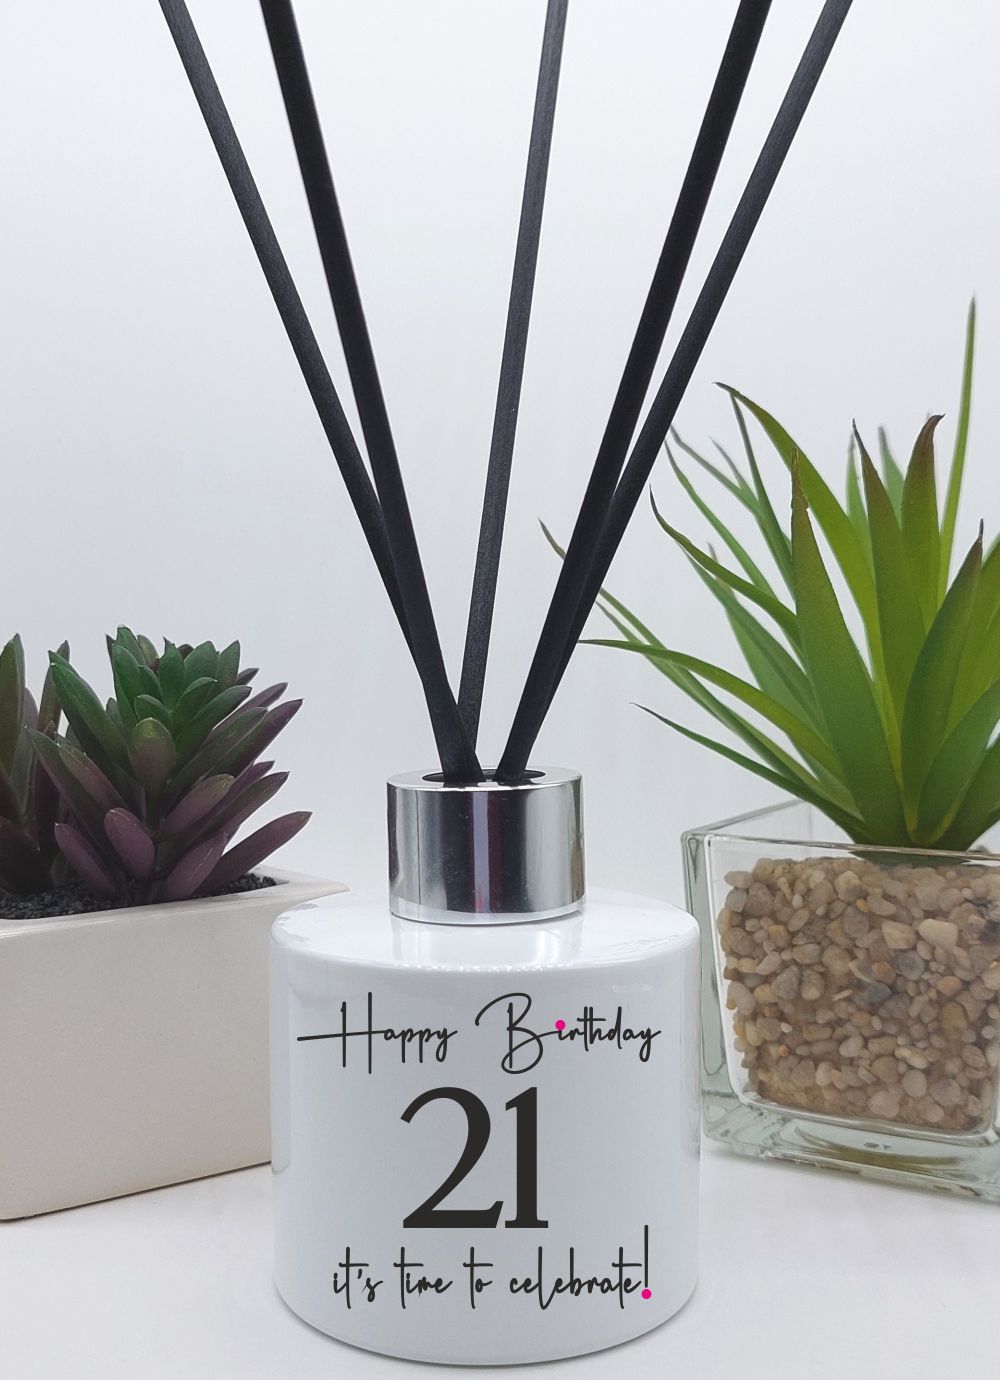 21st birthday reed diffuser gift